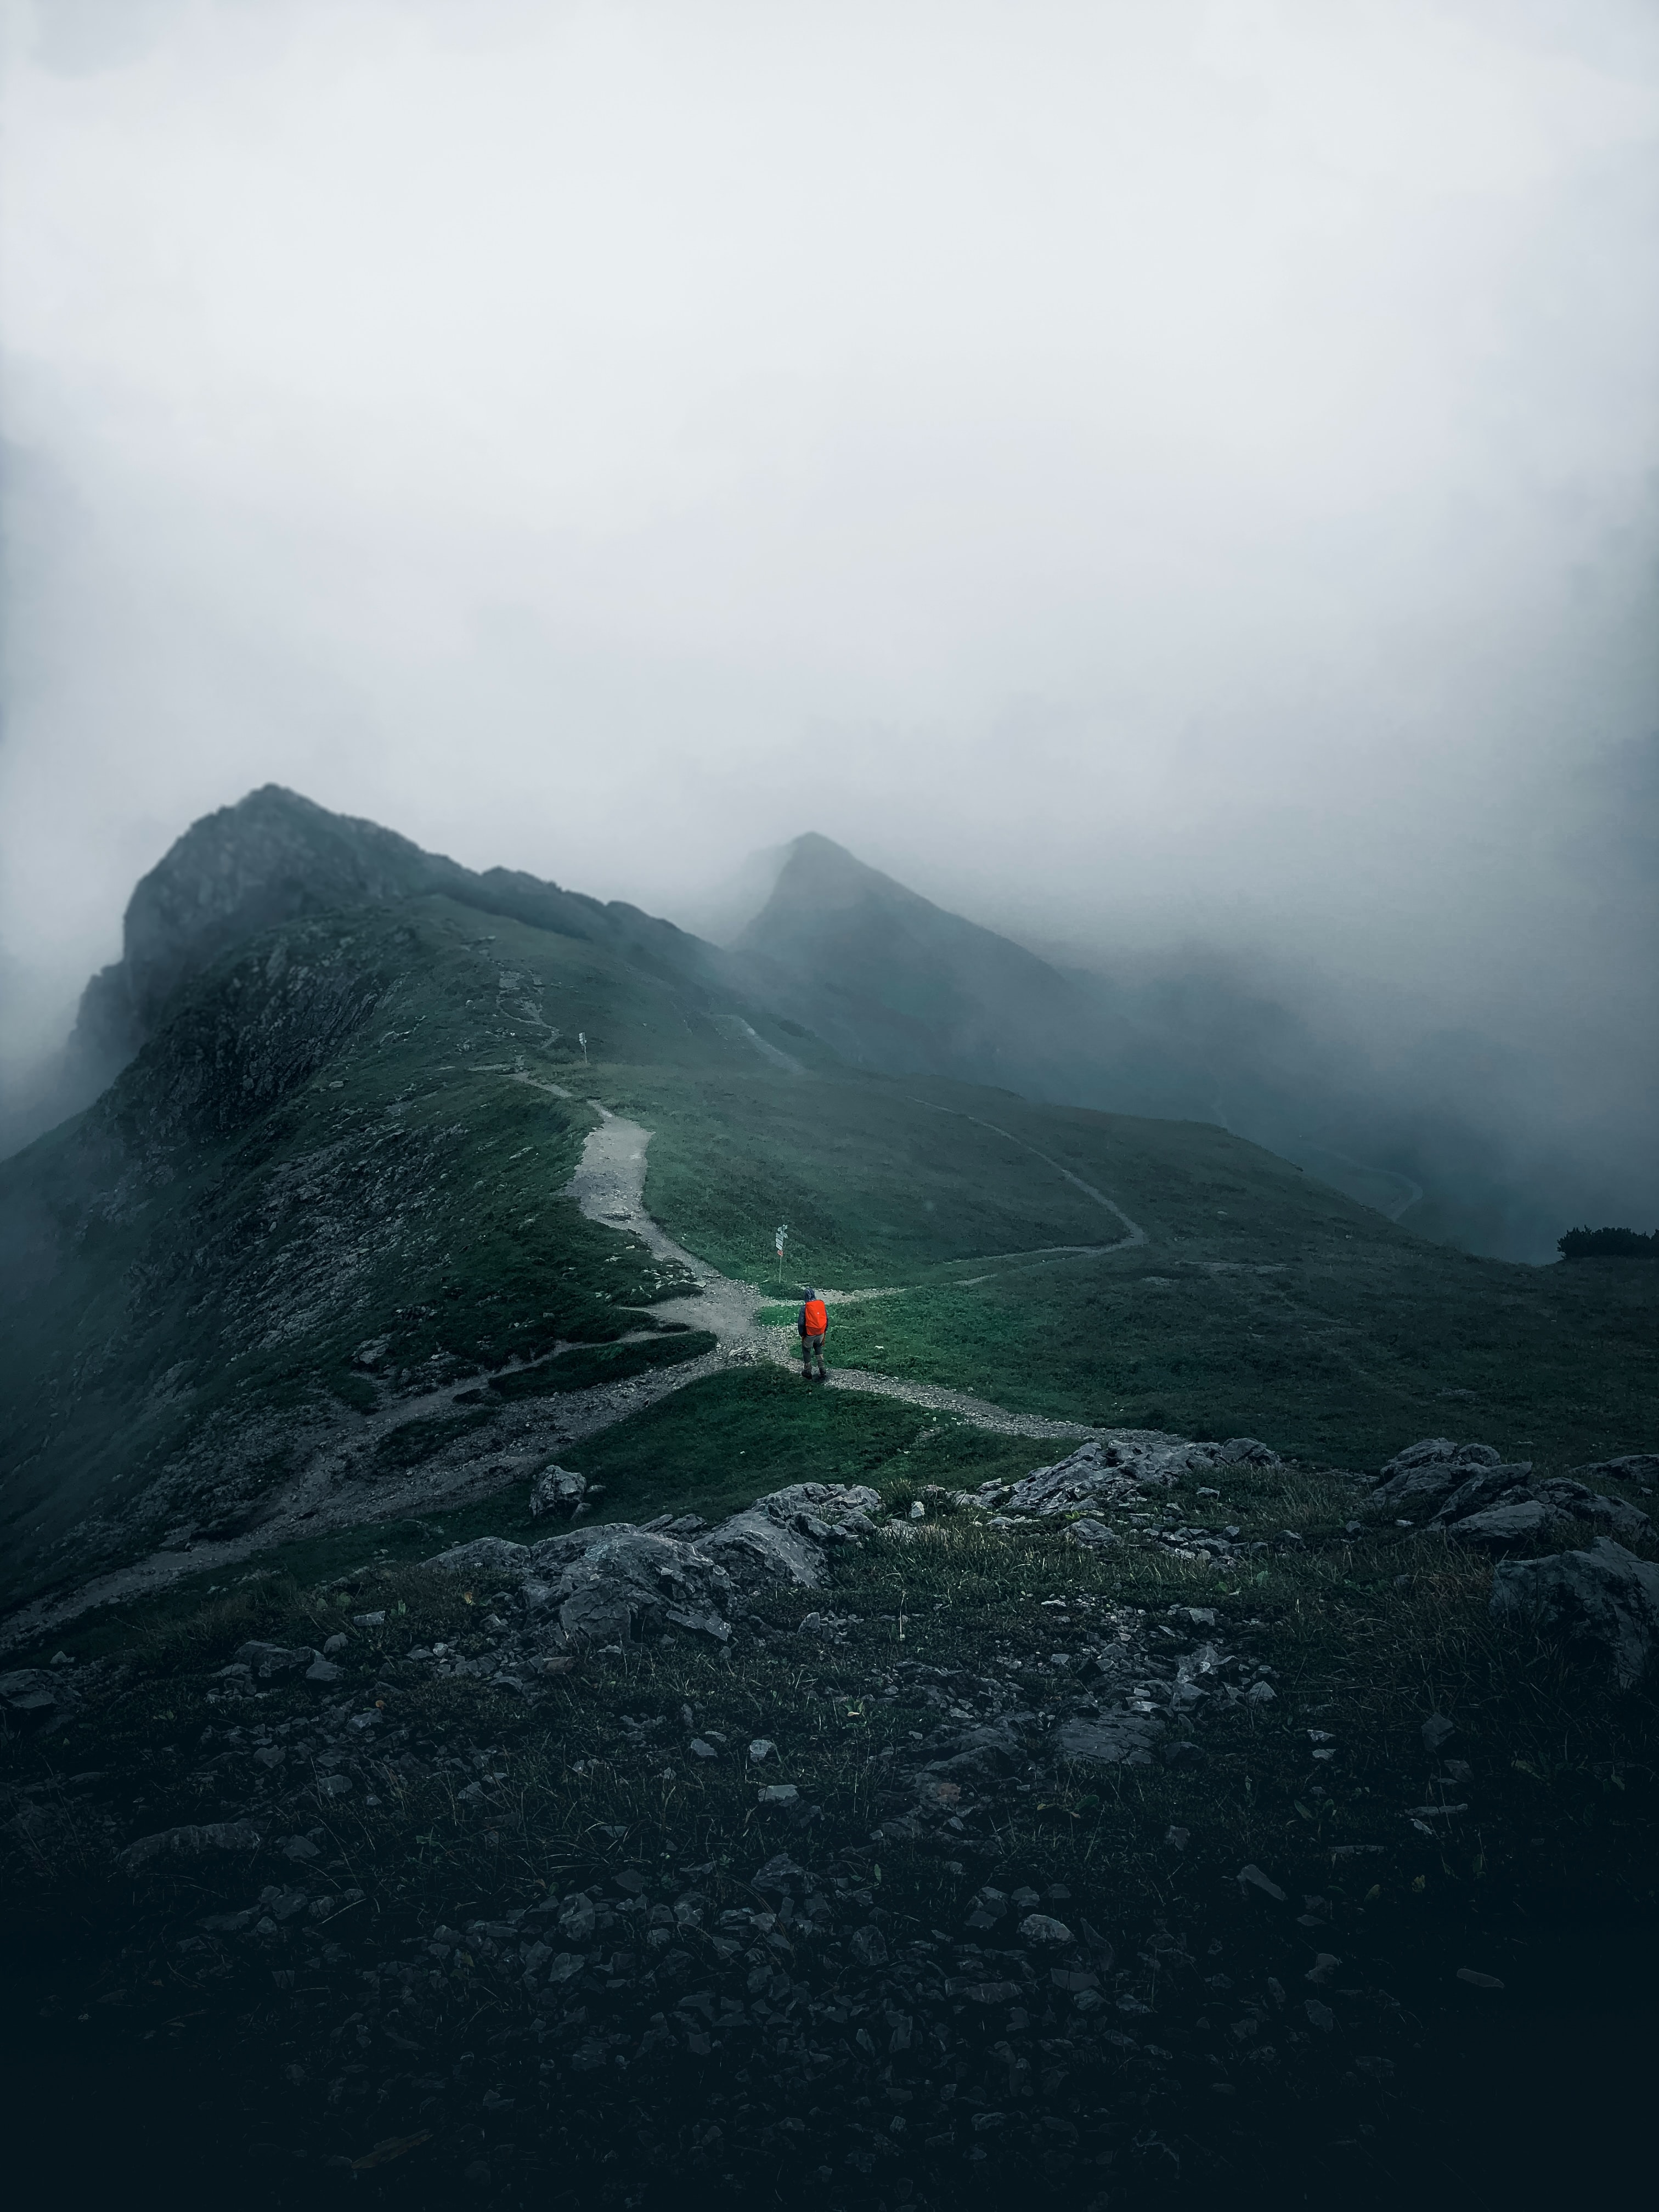 lonely, mountains, miscellanea, miscellaneous, fog, journey, loneliness, alone, traveler, traveller